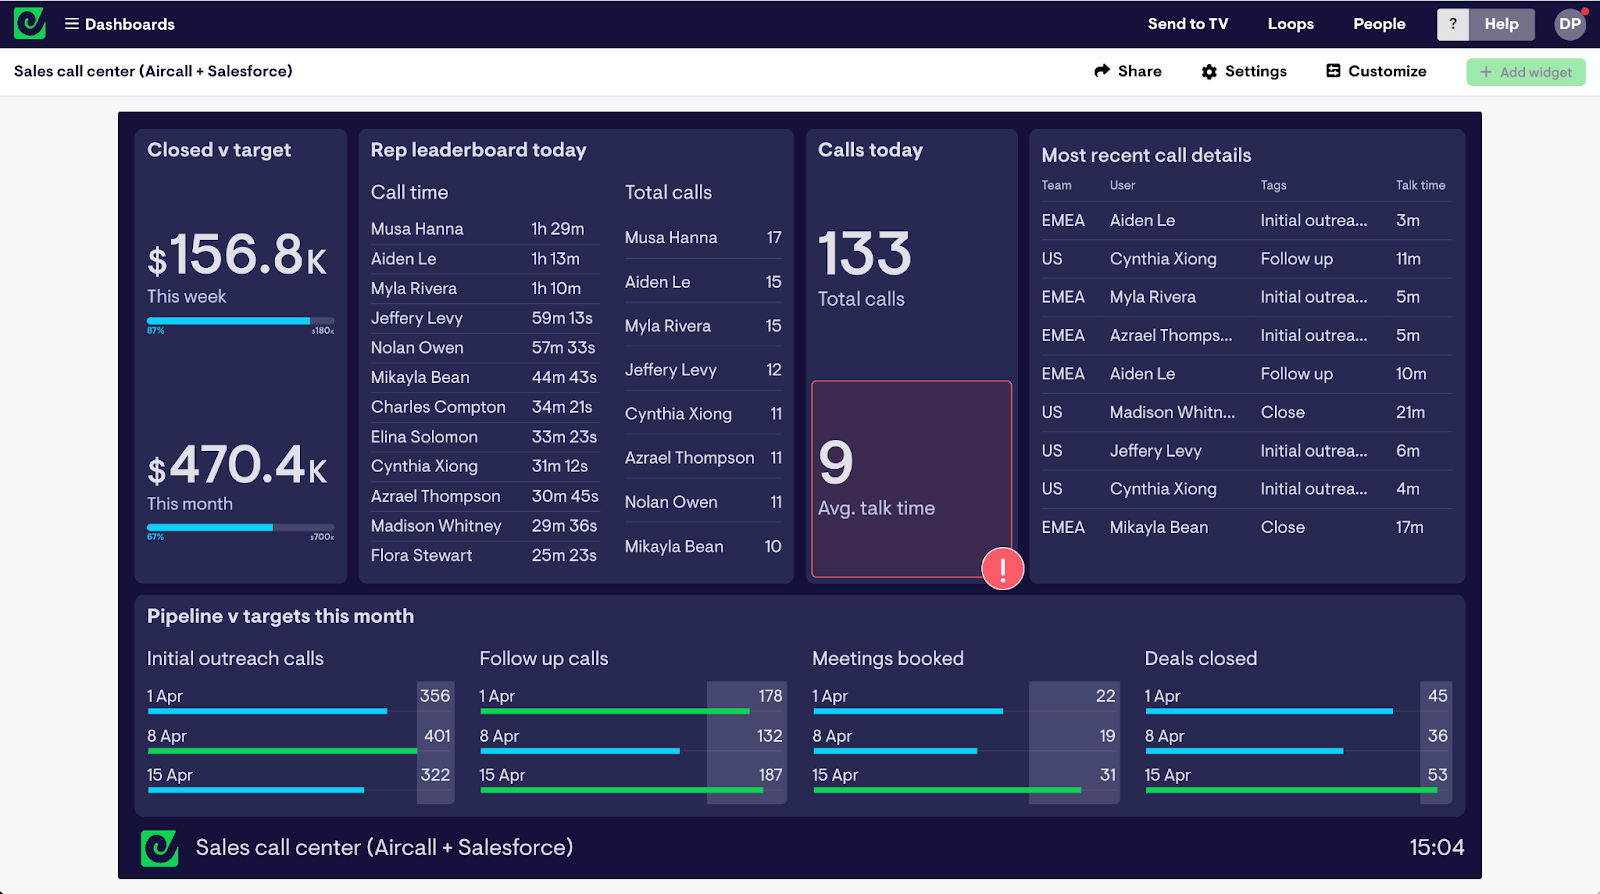 Completed Salesforce and Aircall dashboard